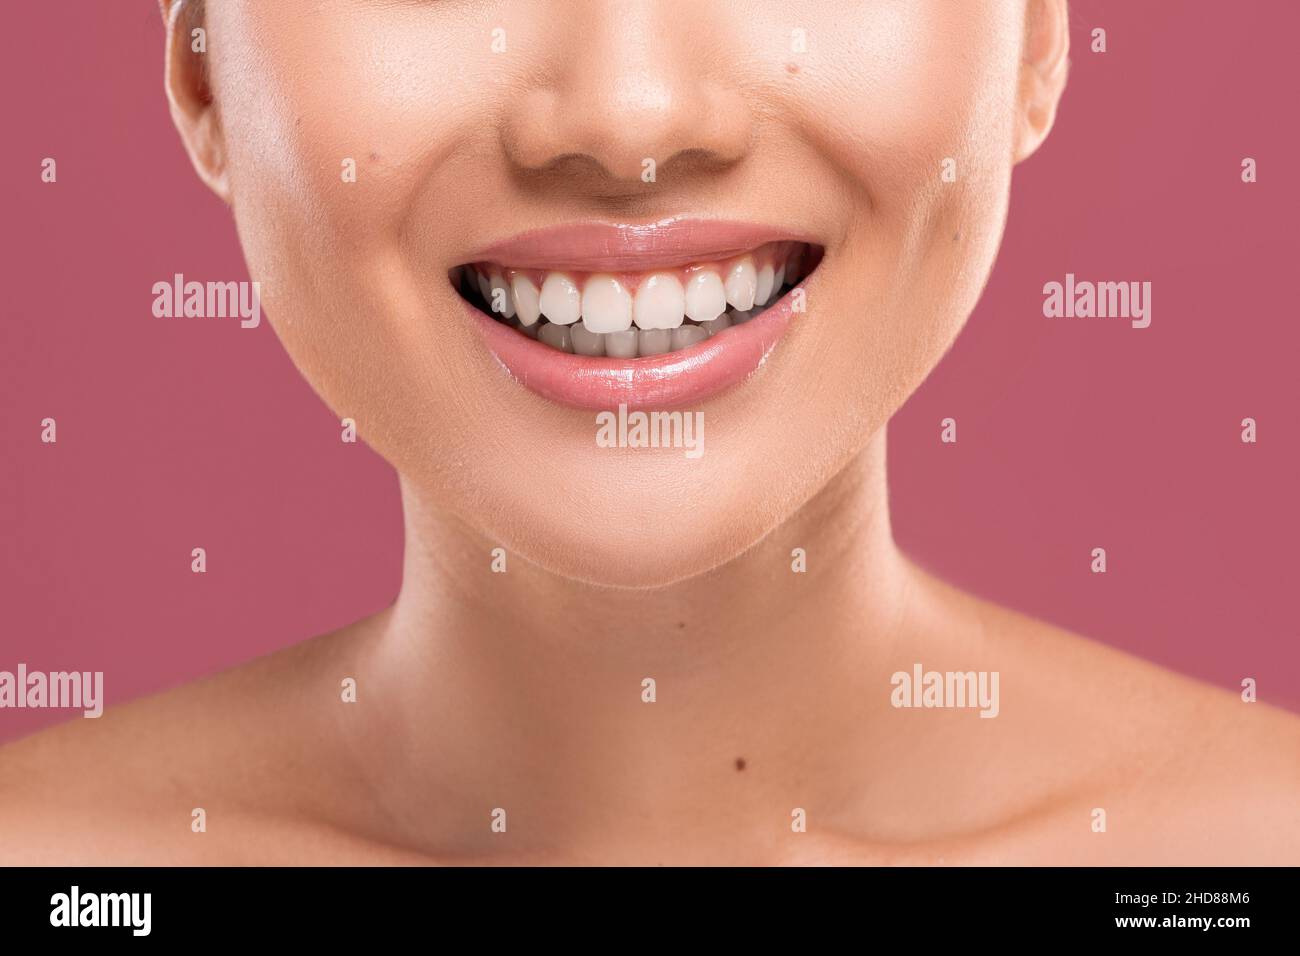 Female smile. Unrecognizable woman smiling, showing perfect white teeth Stock Photo